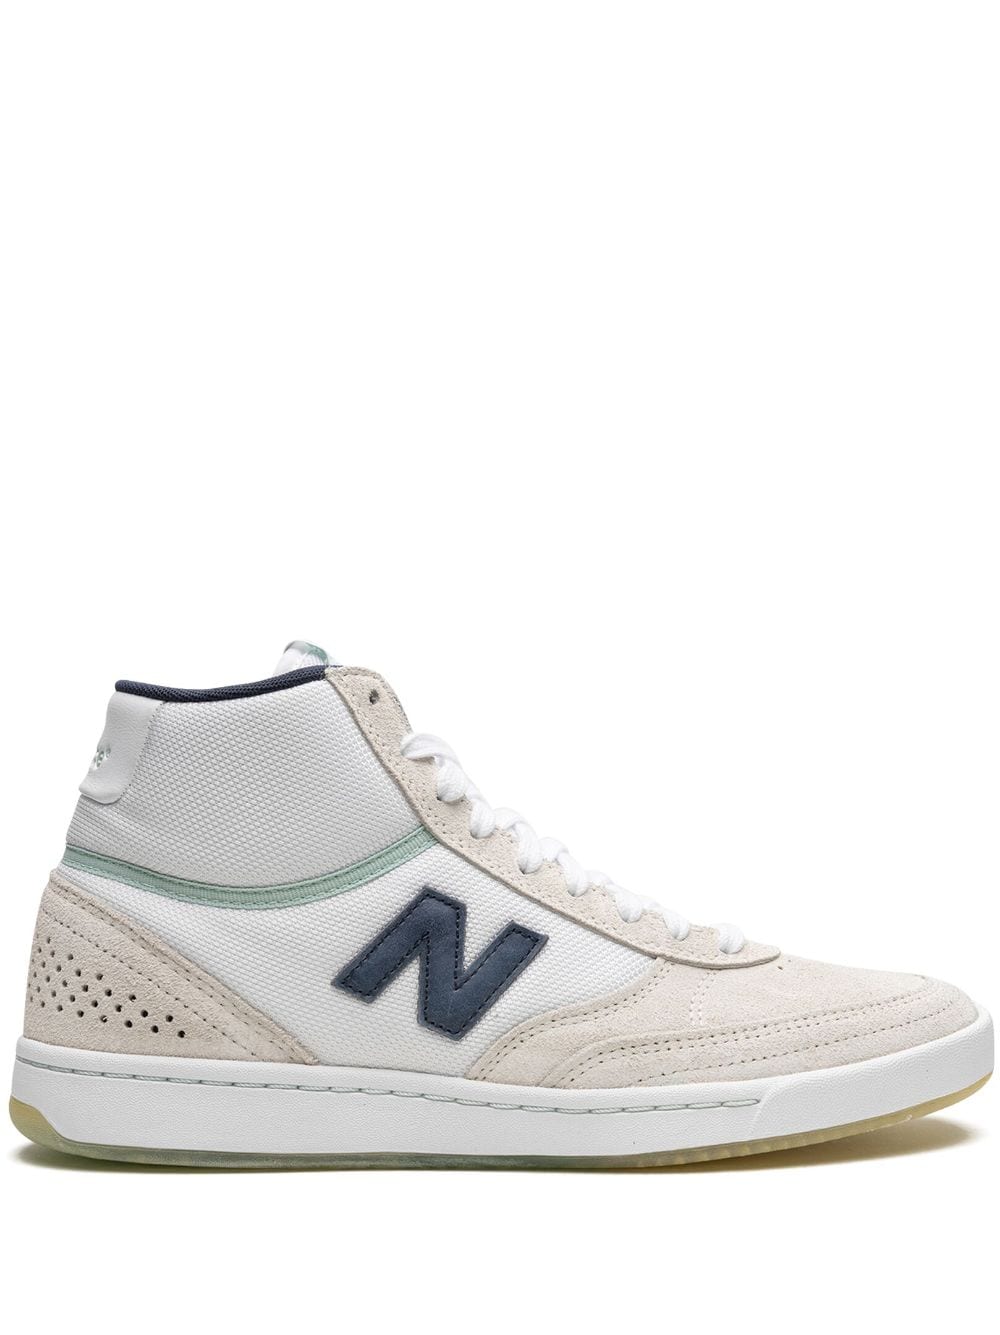 New Balance x Tom Knox Numeric 440 High "White Navy Teal" sneakers